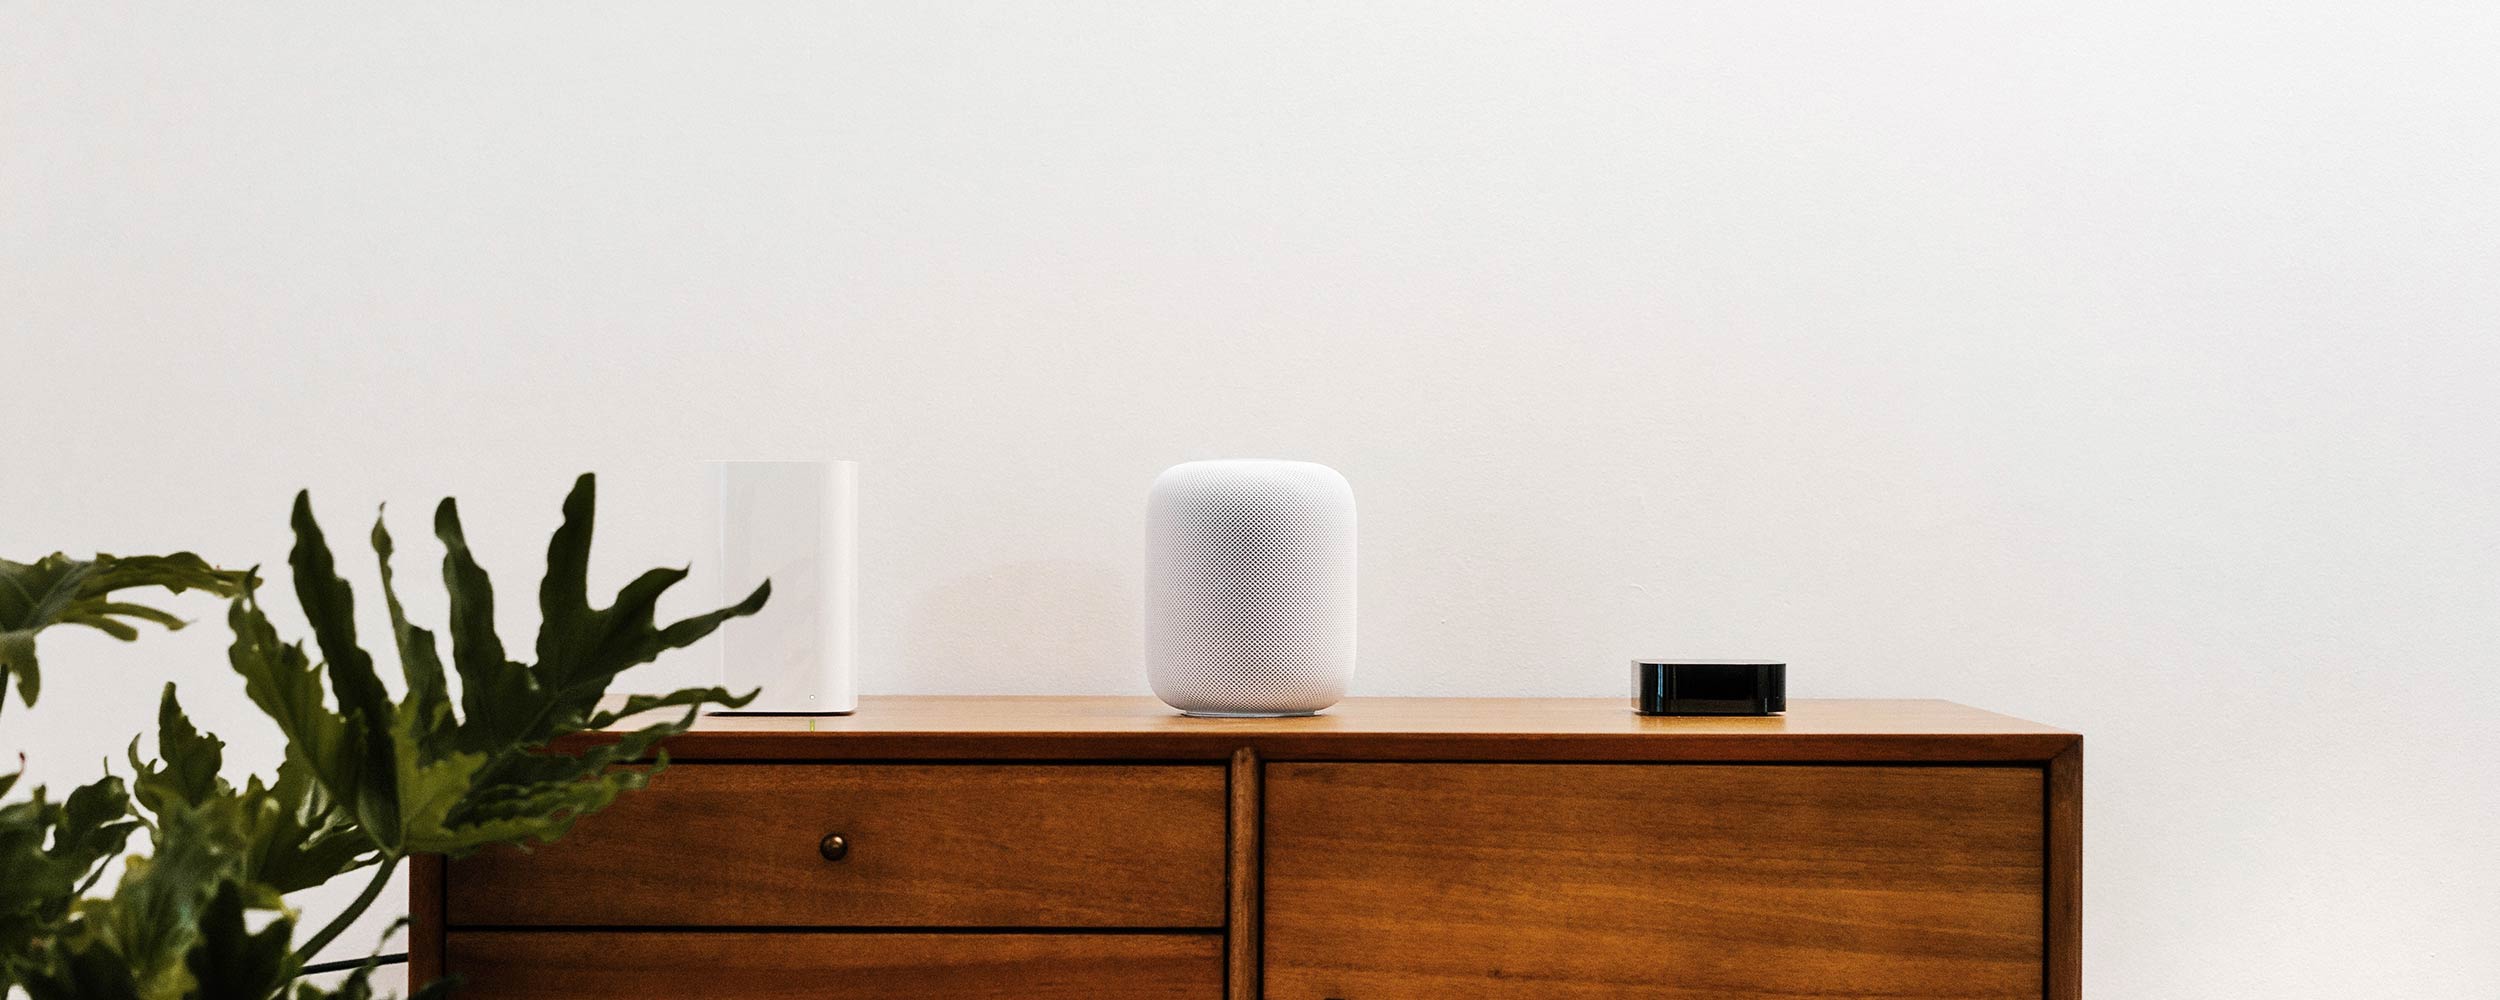 An array of smart speakers on a tabletop.